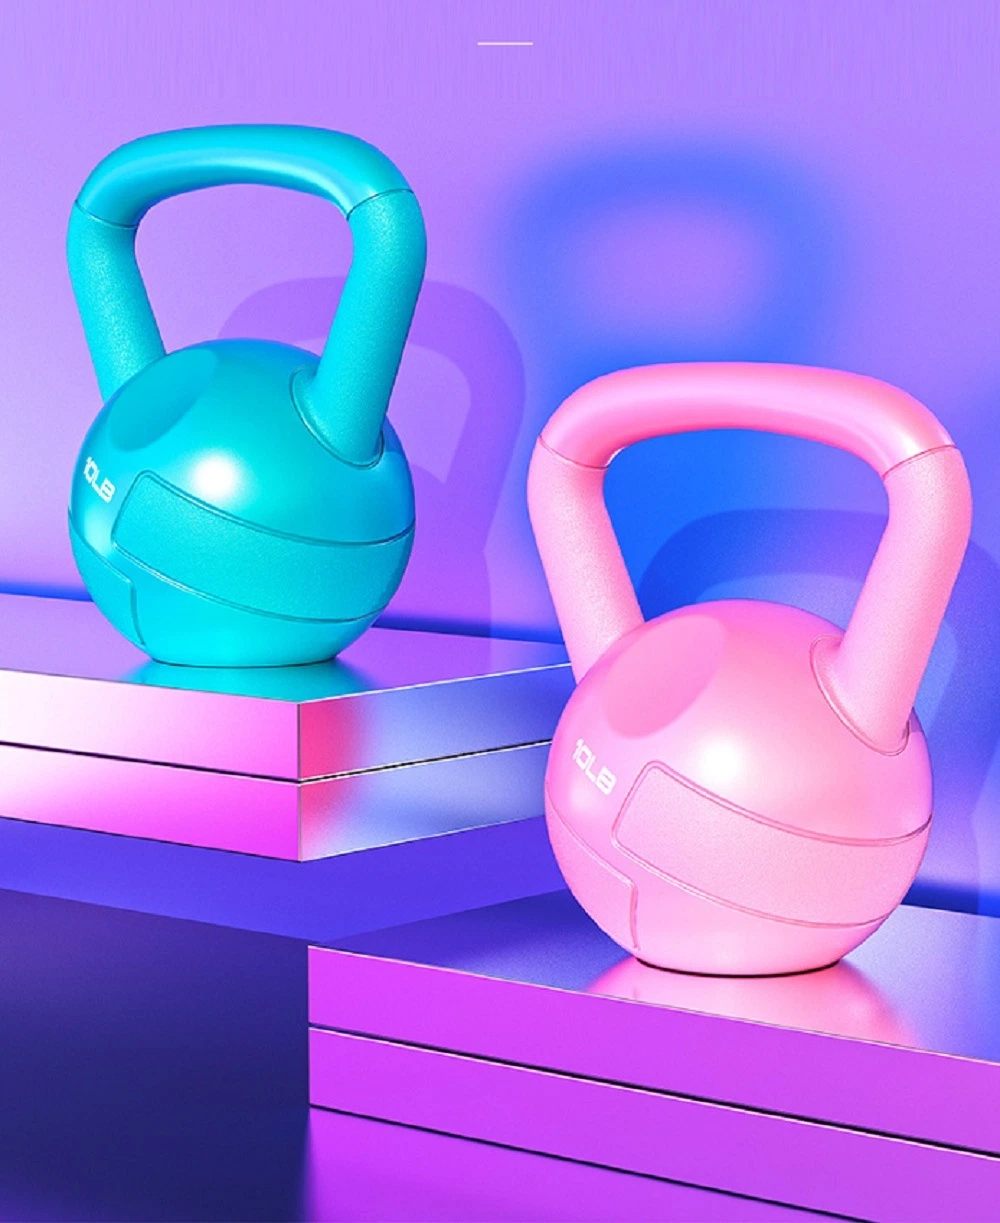 Adjustable Candy Colored Cement Kettlebell Strength Training Solid Iron Kettle Ball Exercise Handle Grip Kettlebells Weights Bl18360